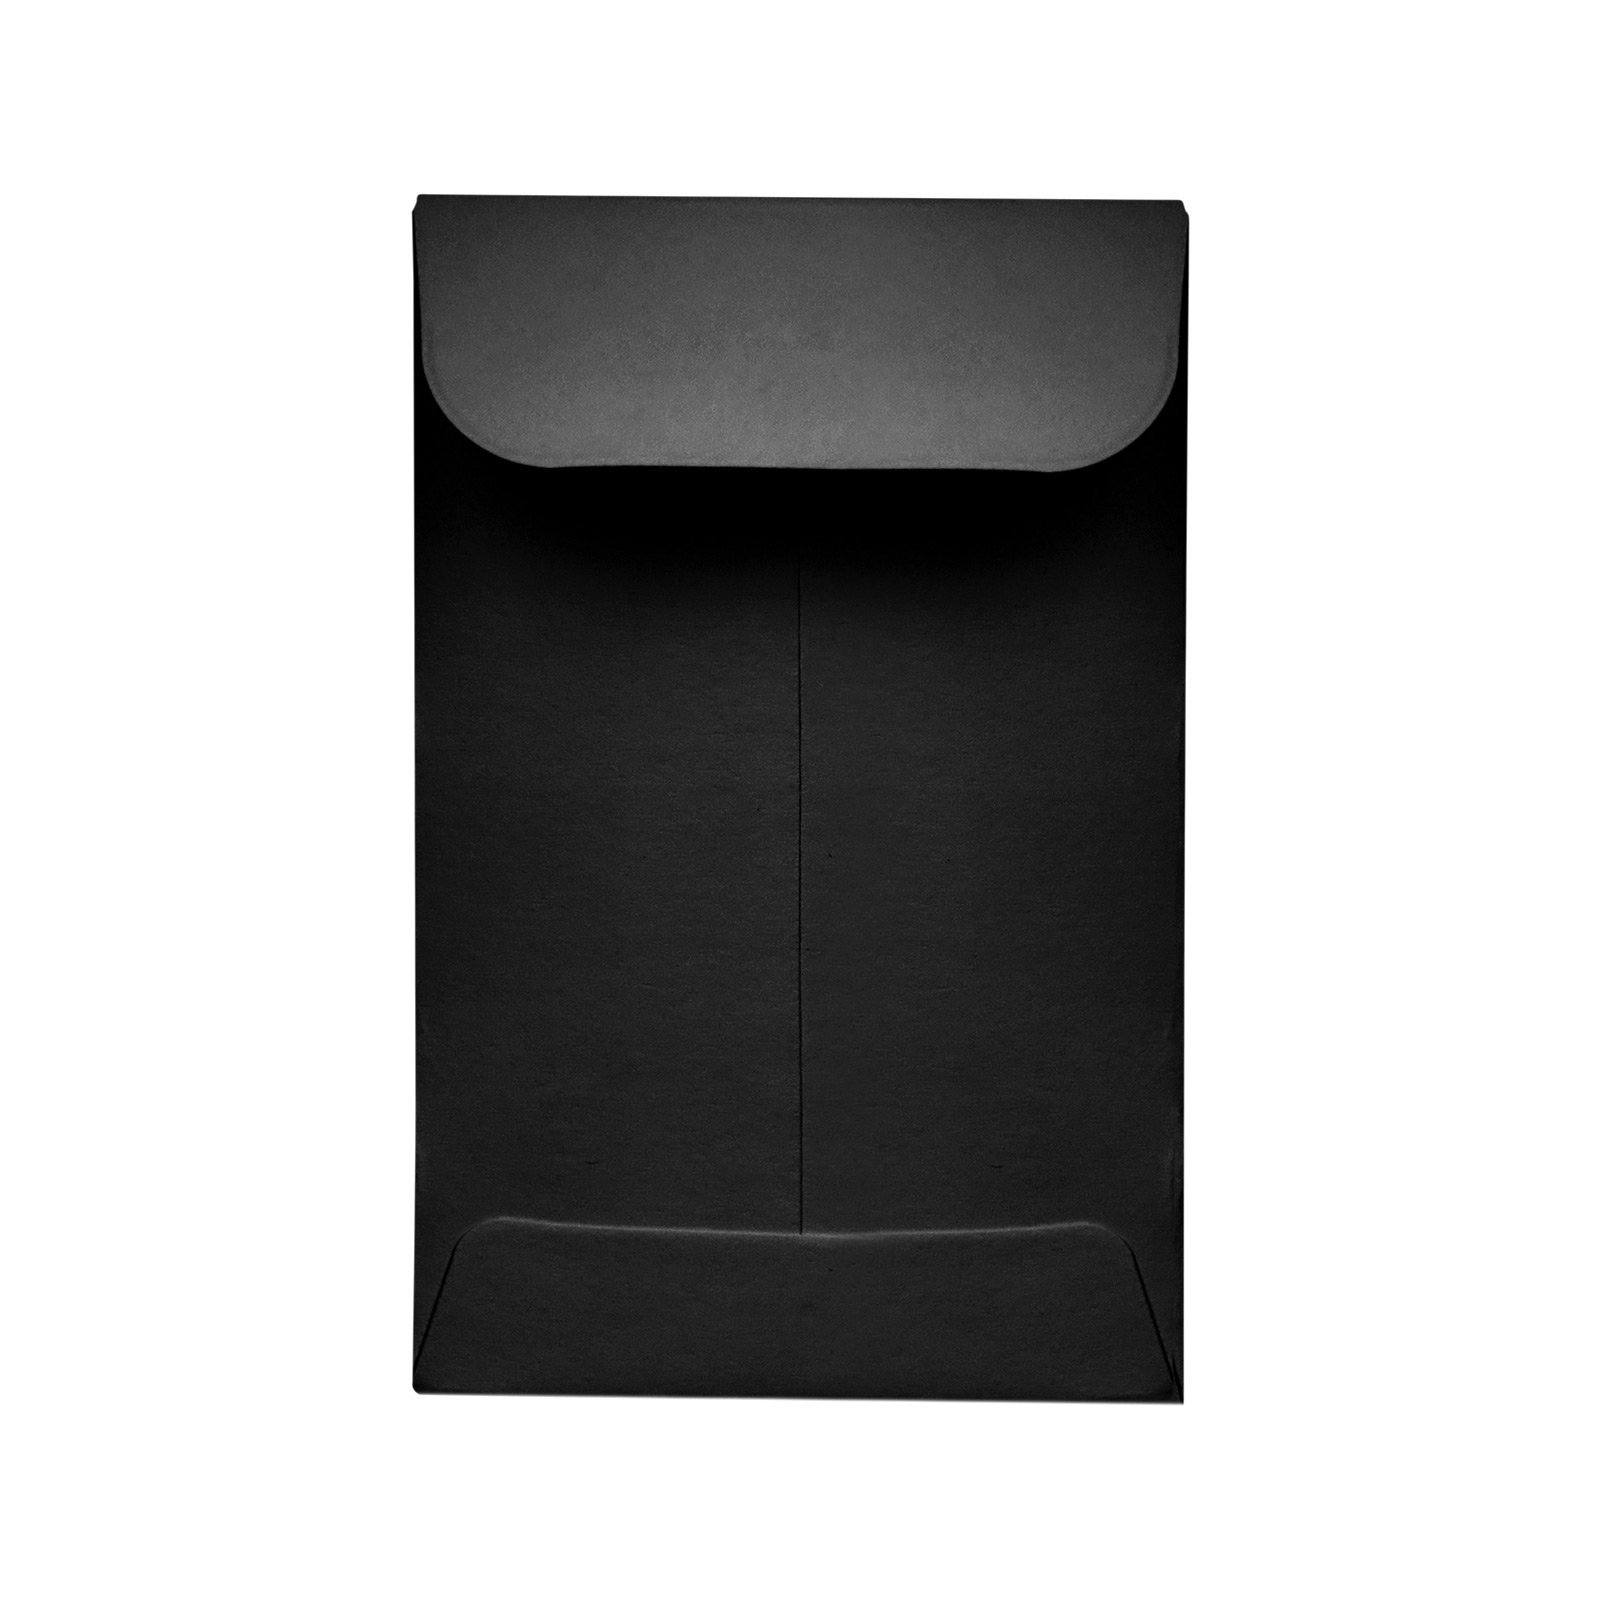 2.25" x 3.5" Concentrate Container Envelope Black 500 Count at Flower Power Packages